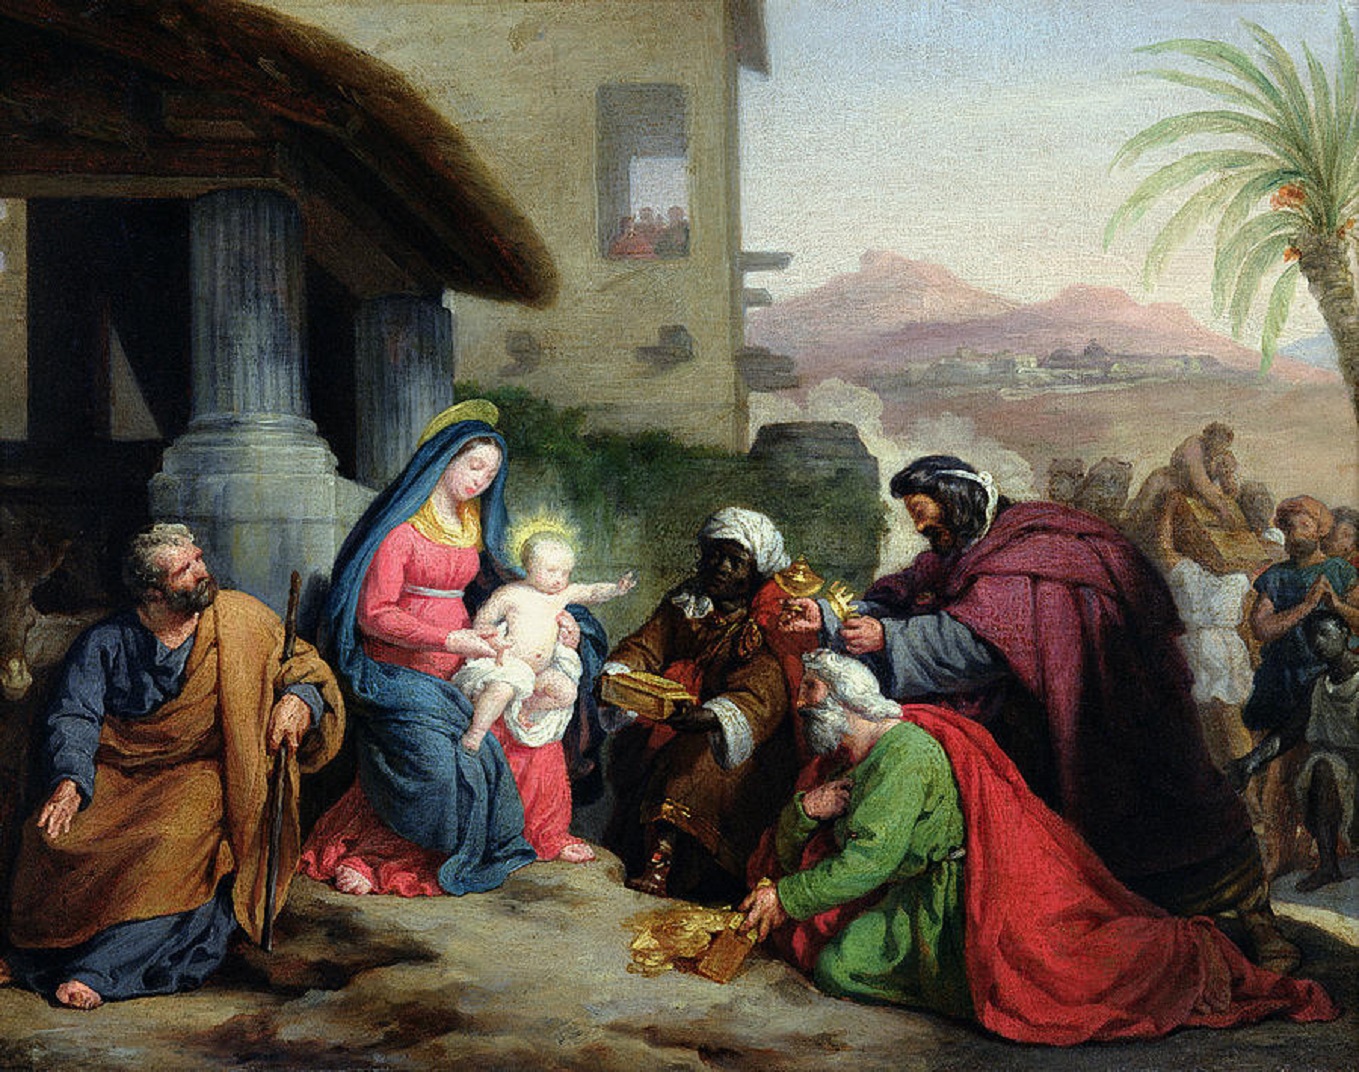 jean_pierre_granger_french_1779-1840_the_adoration_of_the_magi_c_1833-36.jpg